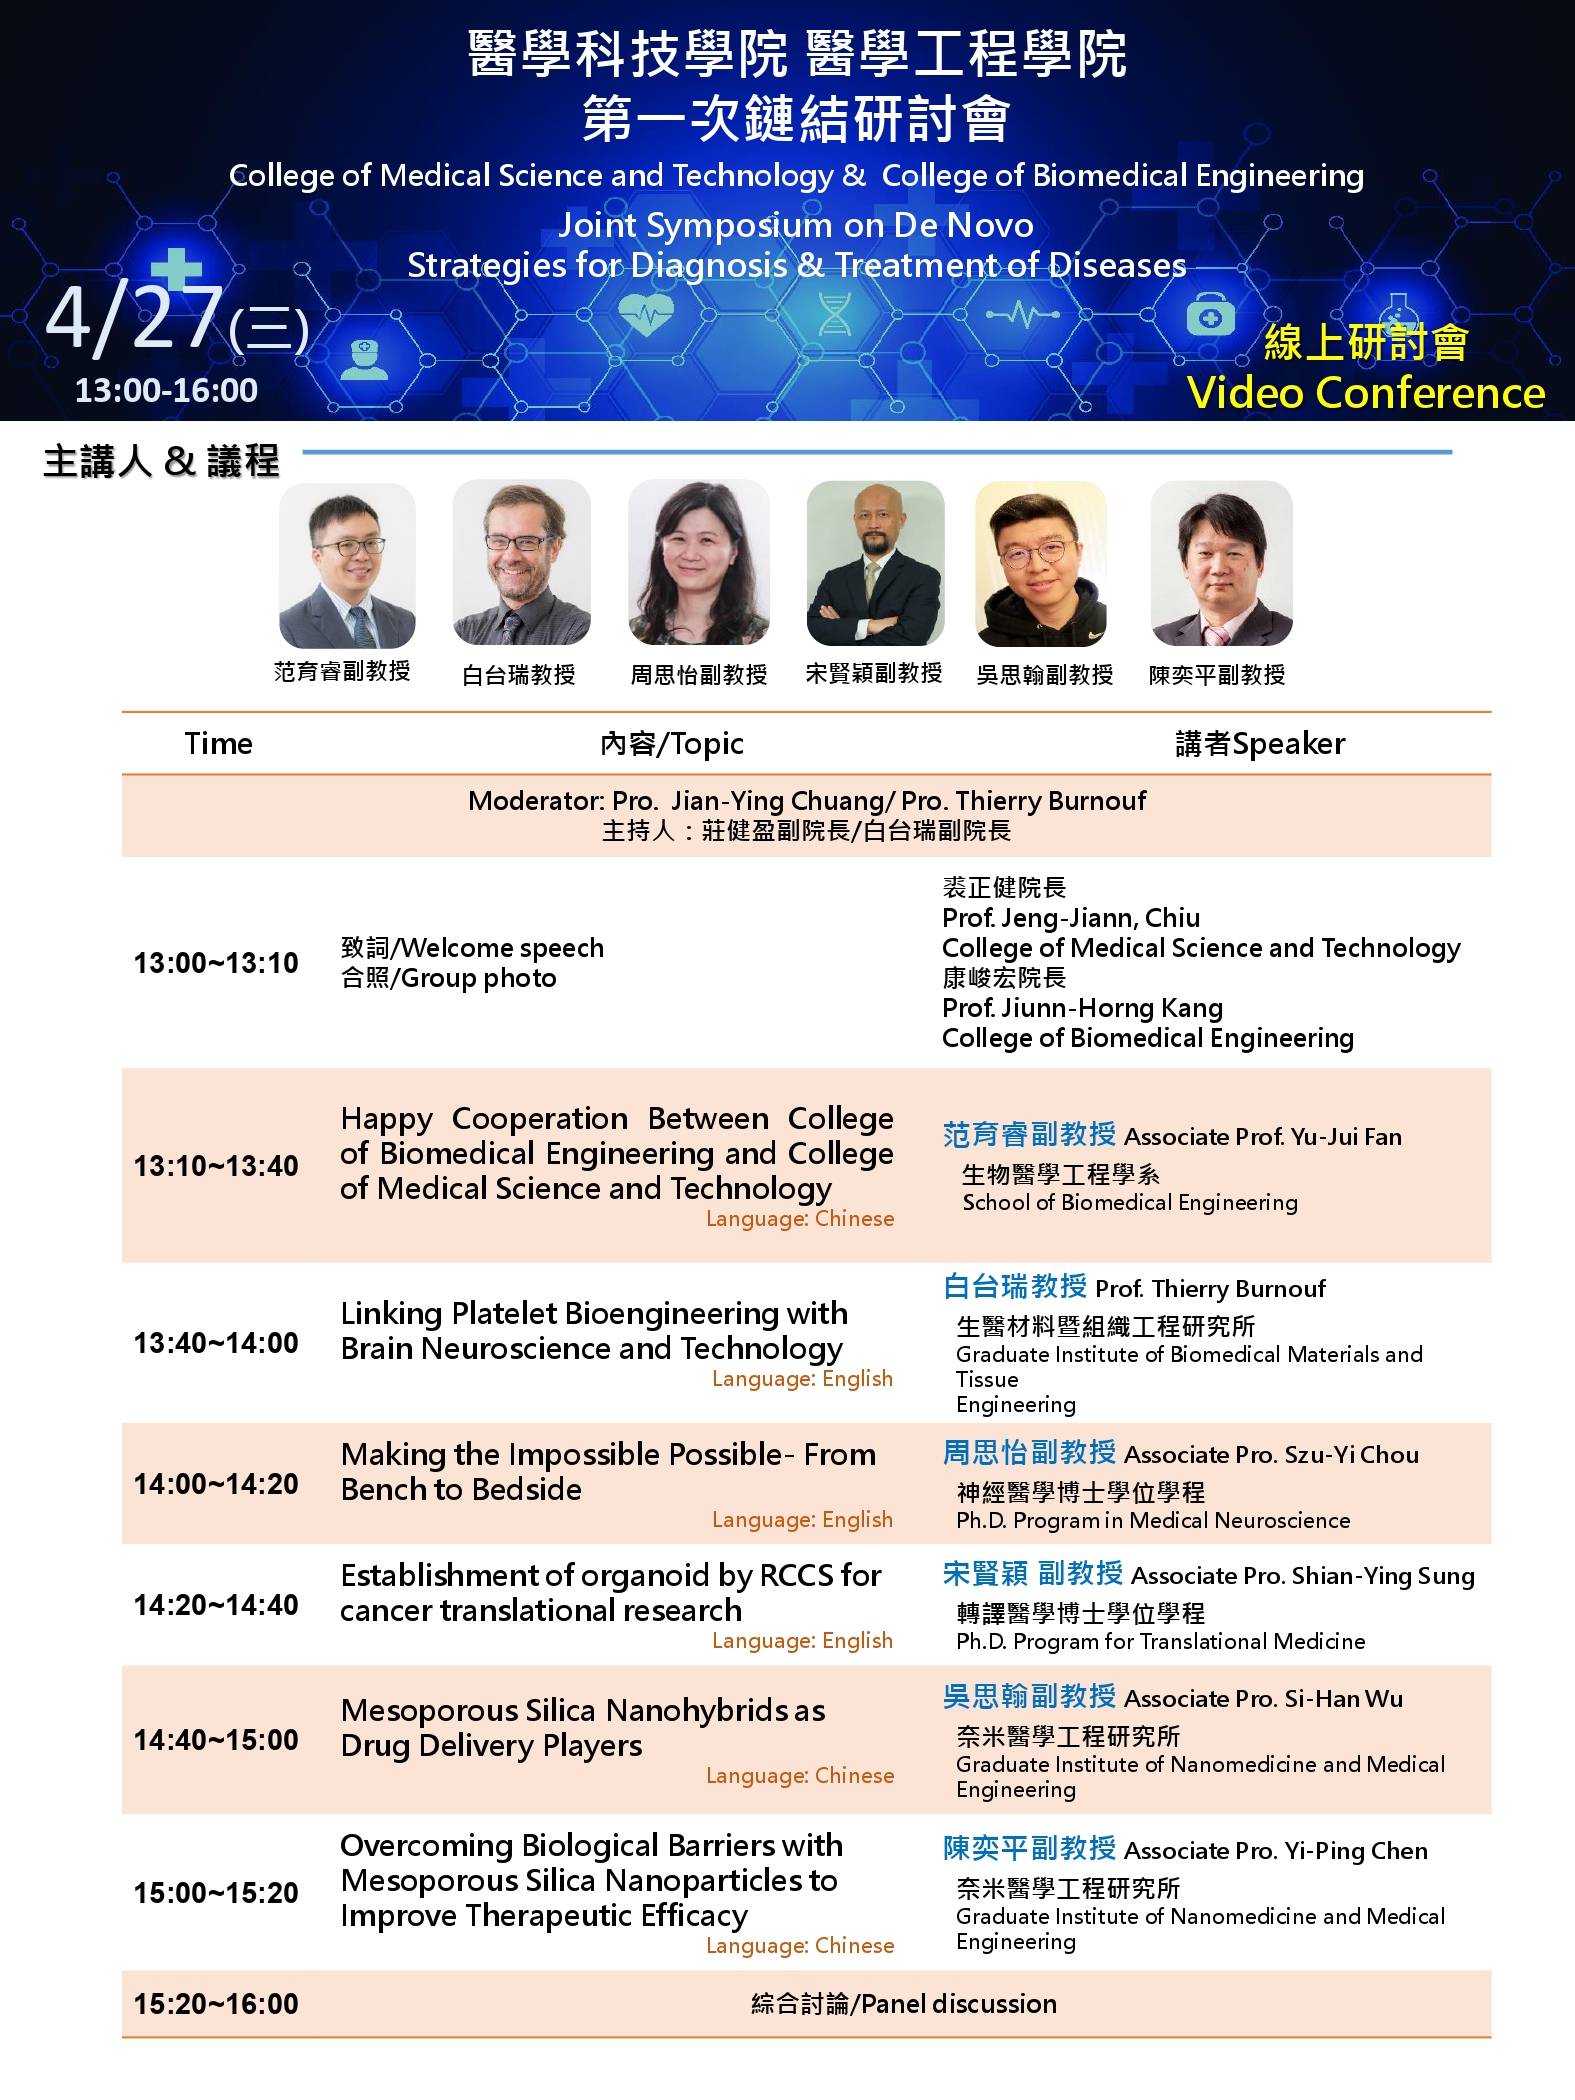 2022.04.27 (W3) 13:00-16:00，Video Conference - College of Medical Science and Technology &  College of Biomedical Engineering  Joint Symposium on De Novo Strategies for Diagnosis & Treatment of Diseases @ https://taipeimedicaluniversity-wll.my.webex.com/taipeimedicaluniversity-wll.my-tc/j.php?MTID=m9507bfc0a896c595f8baed77b75f593a